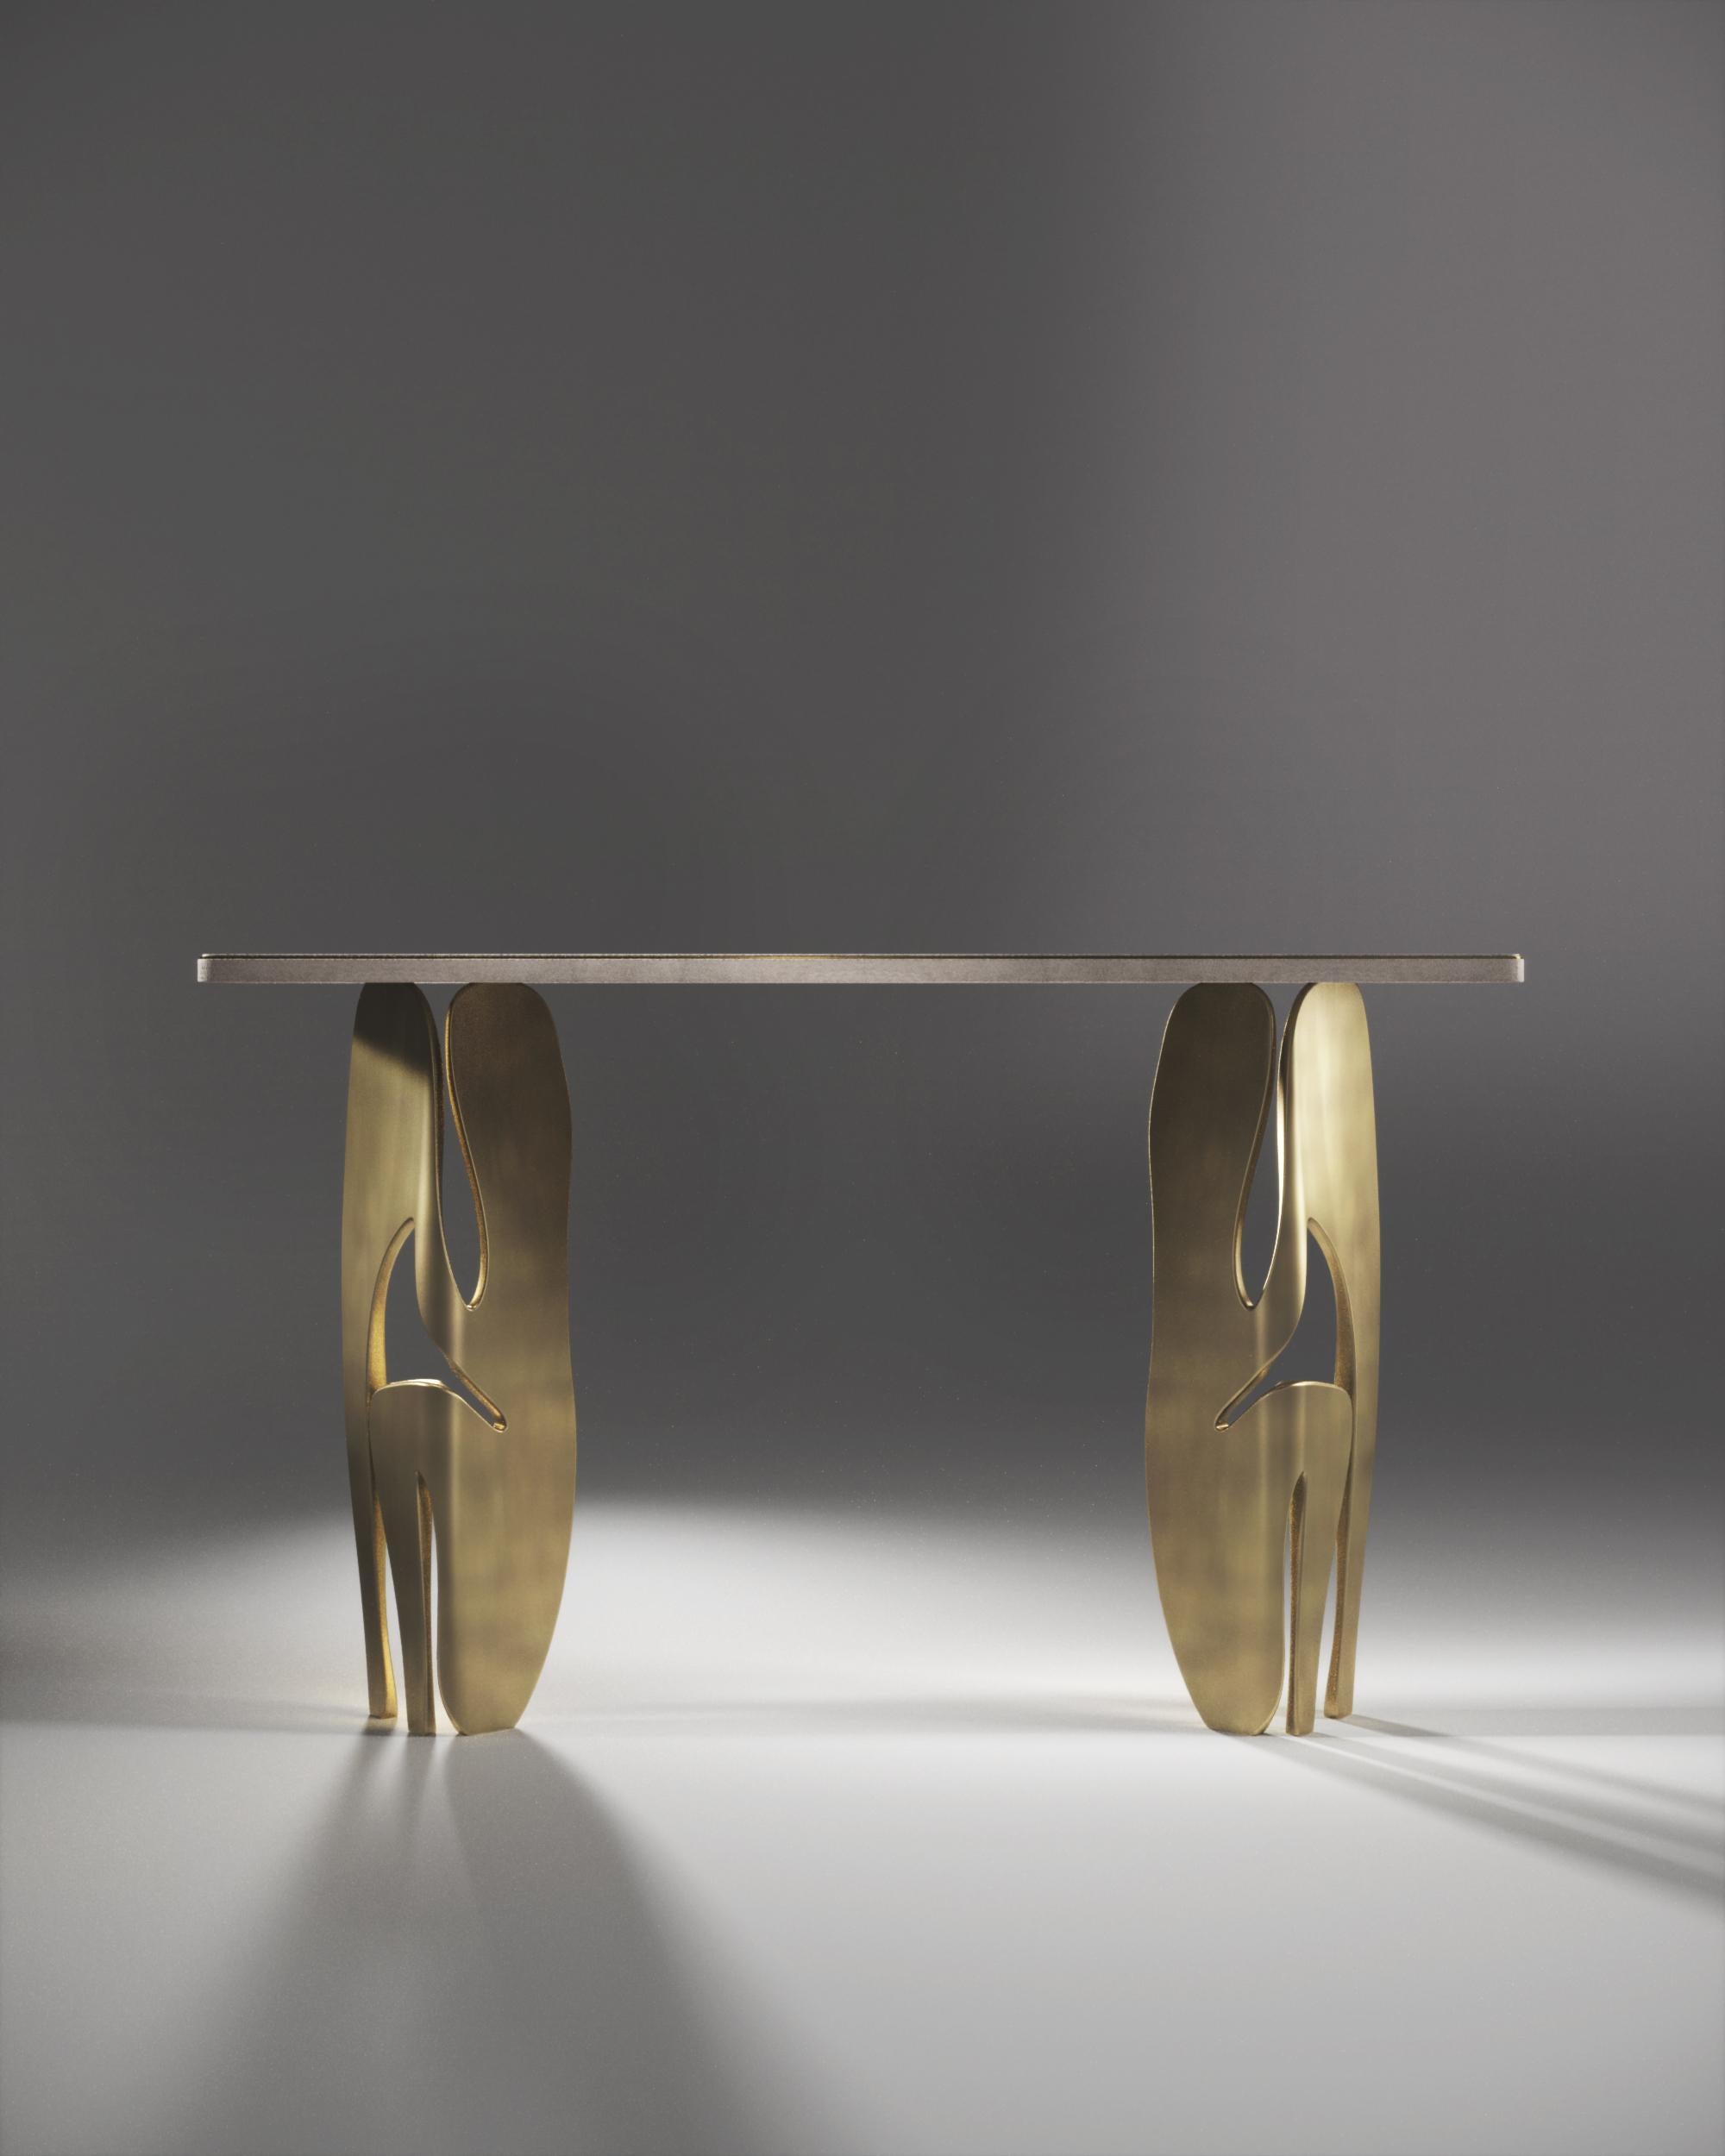 The Metropolis II console by R&Y Augousti is a statement piece. The cream shagreen inlaid top sits on a pair of dramatic sculptural bronze-patina brass legs, showcasing the brand's incredible artisanale work. The top has a discreet metal indentation